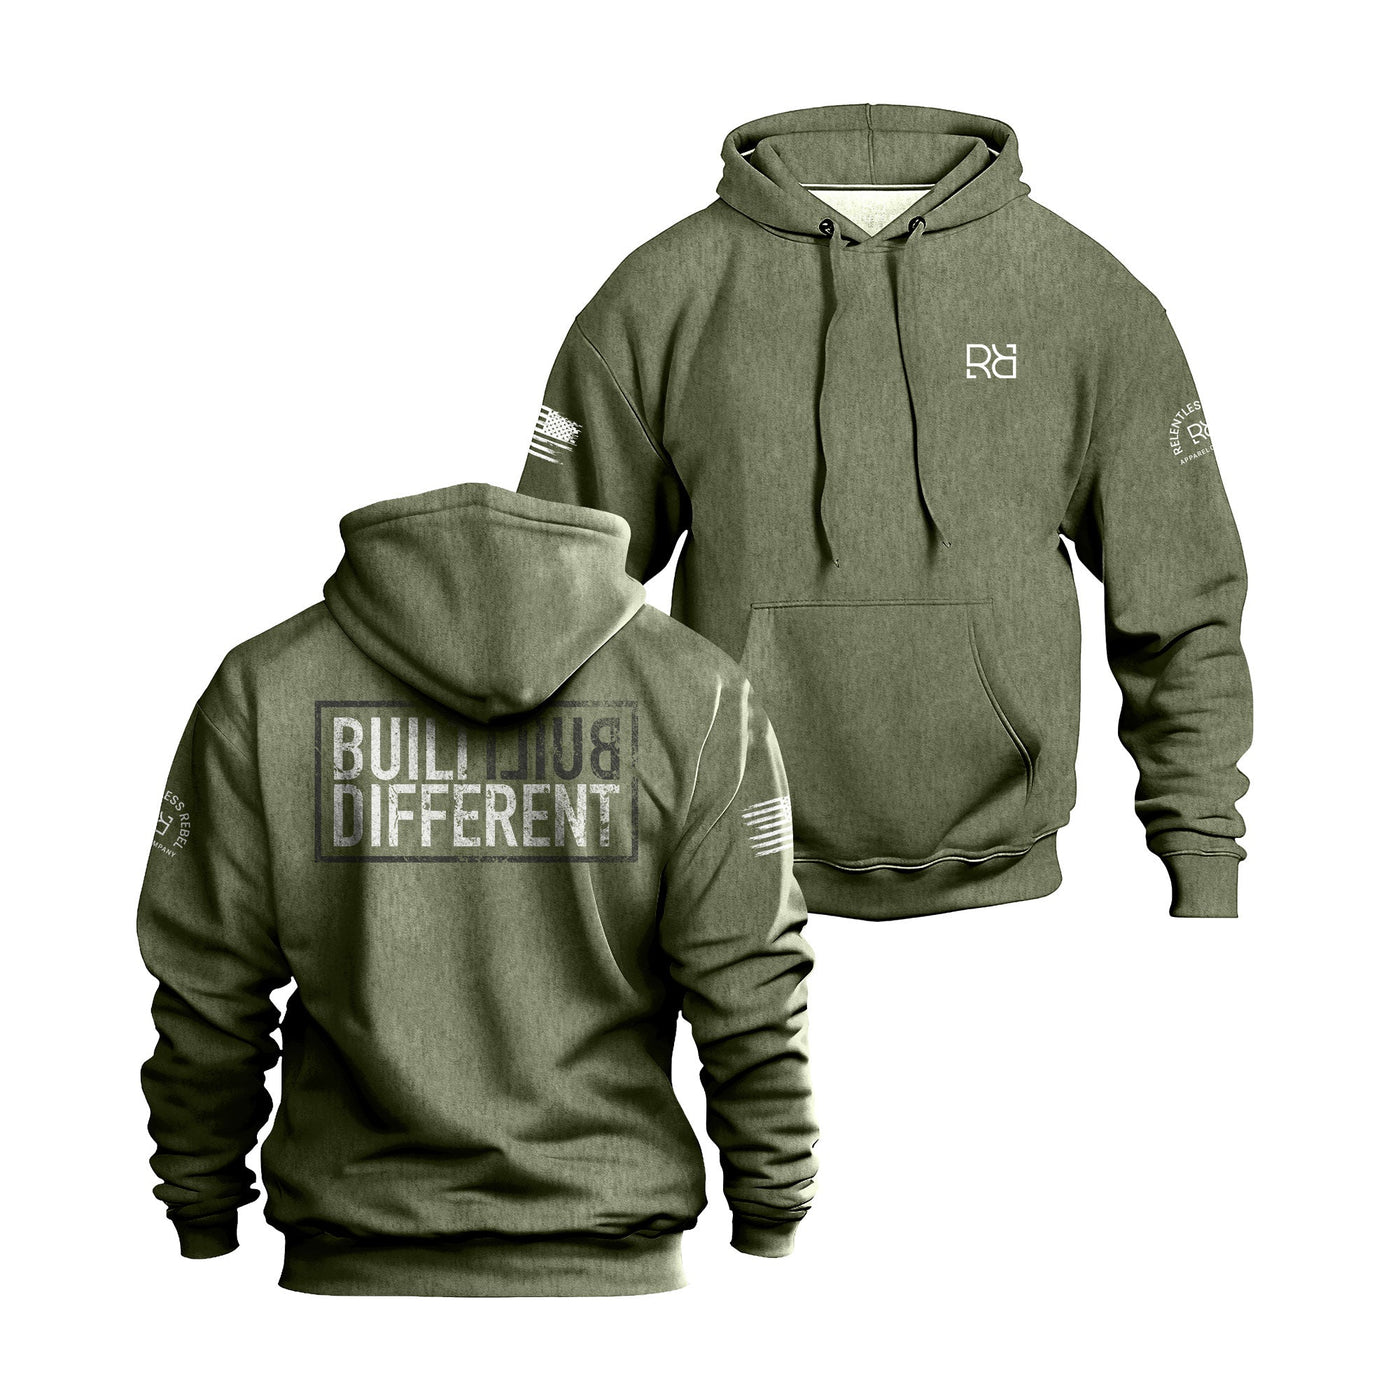 Built Different back design heavyweight military green hoodie